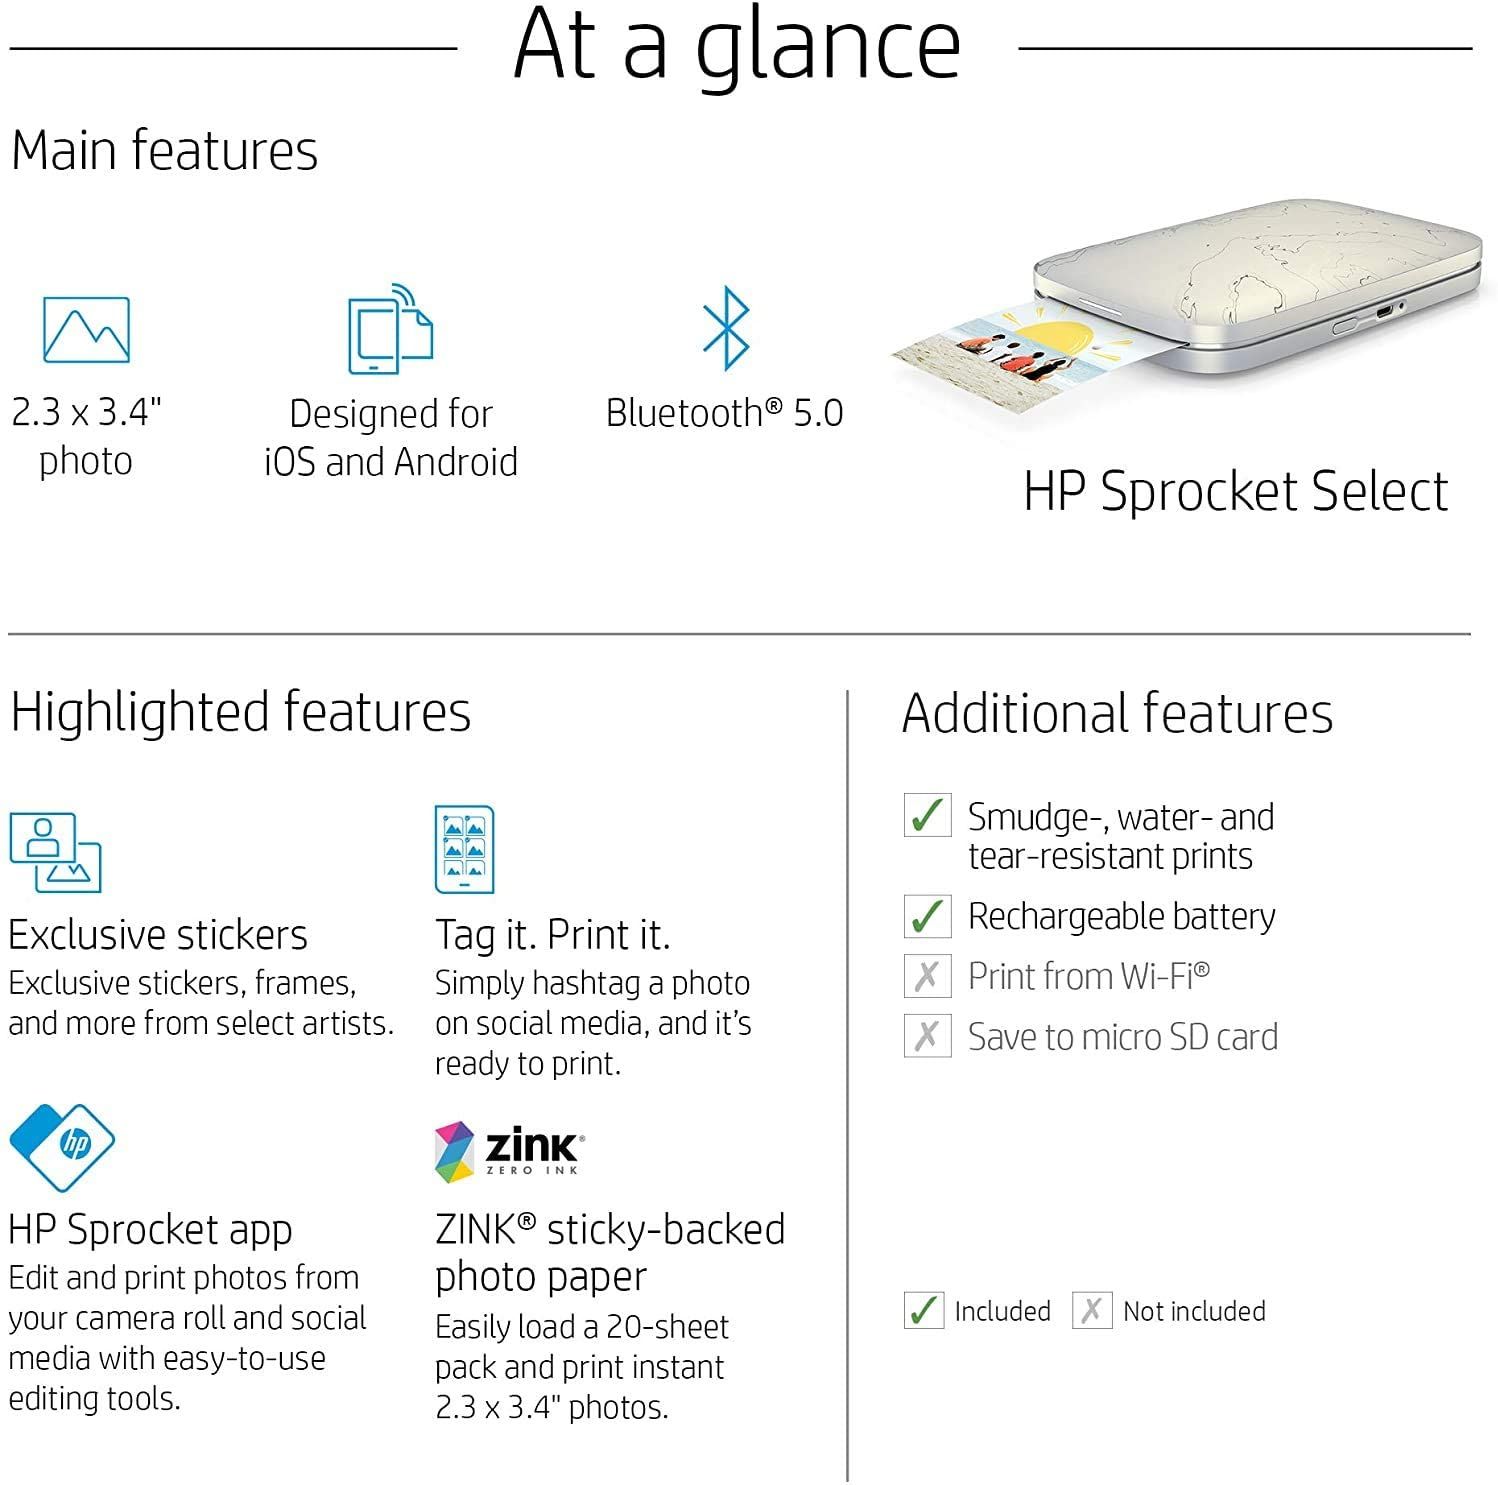 HP Sprocket Select features